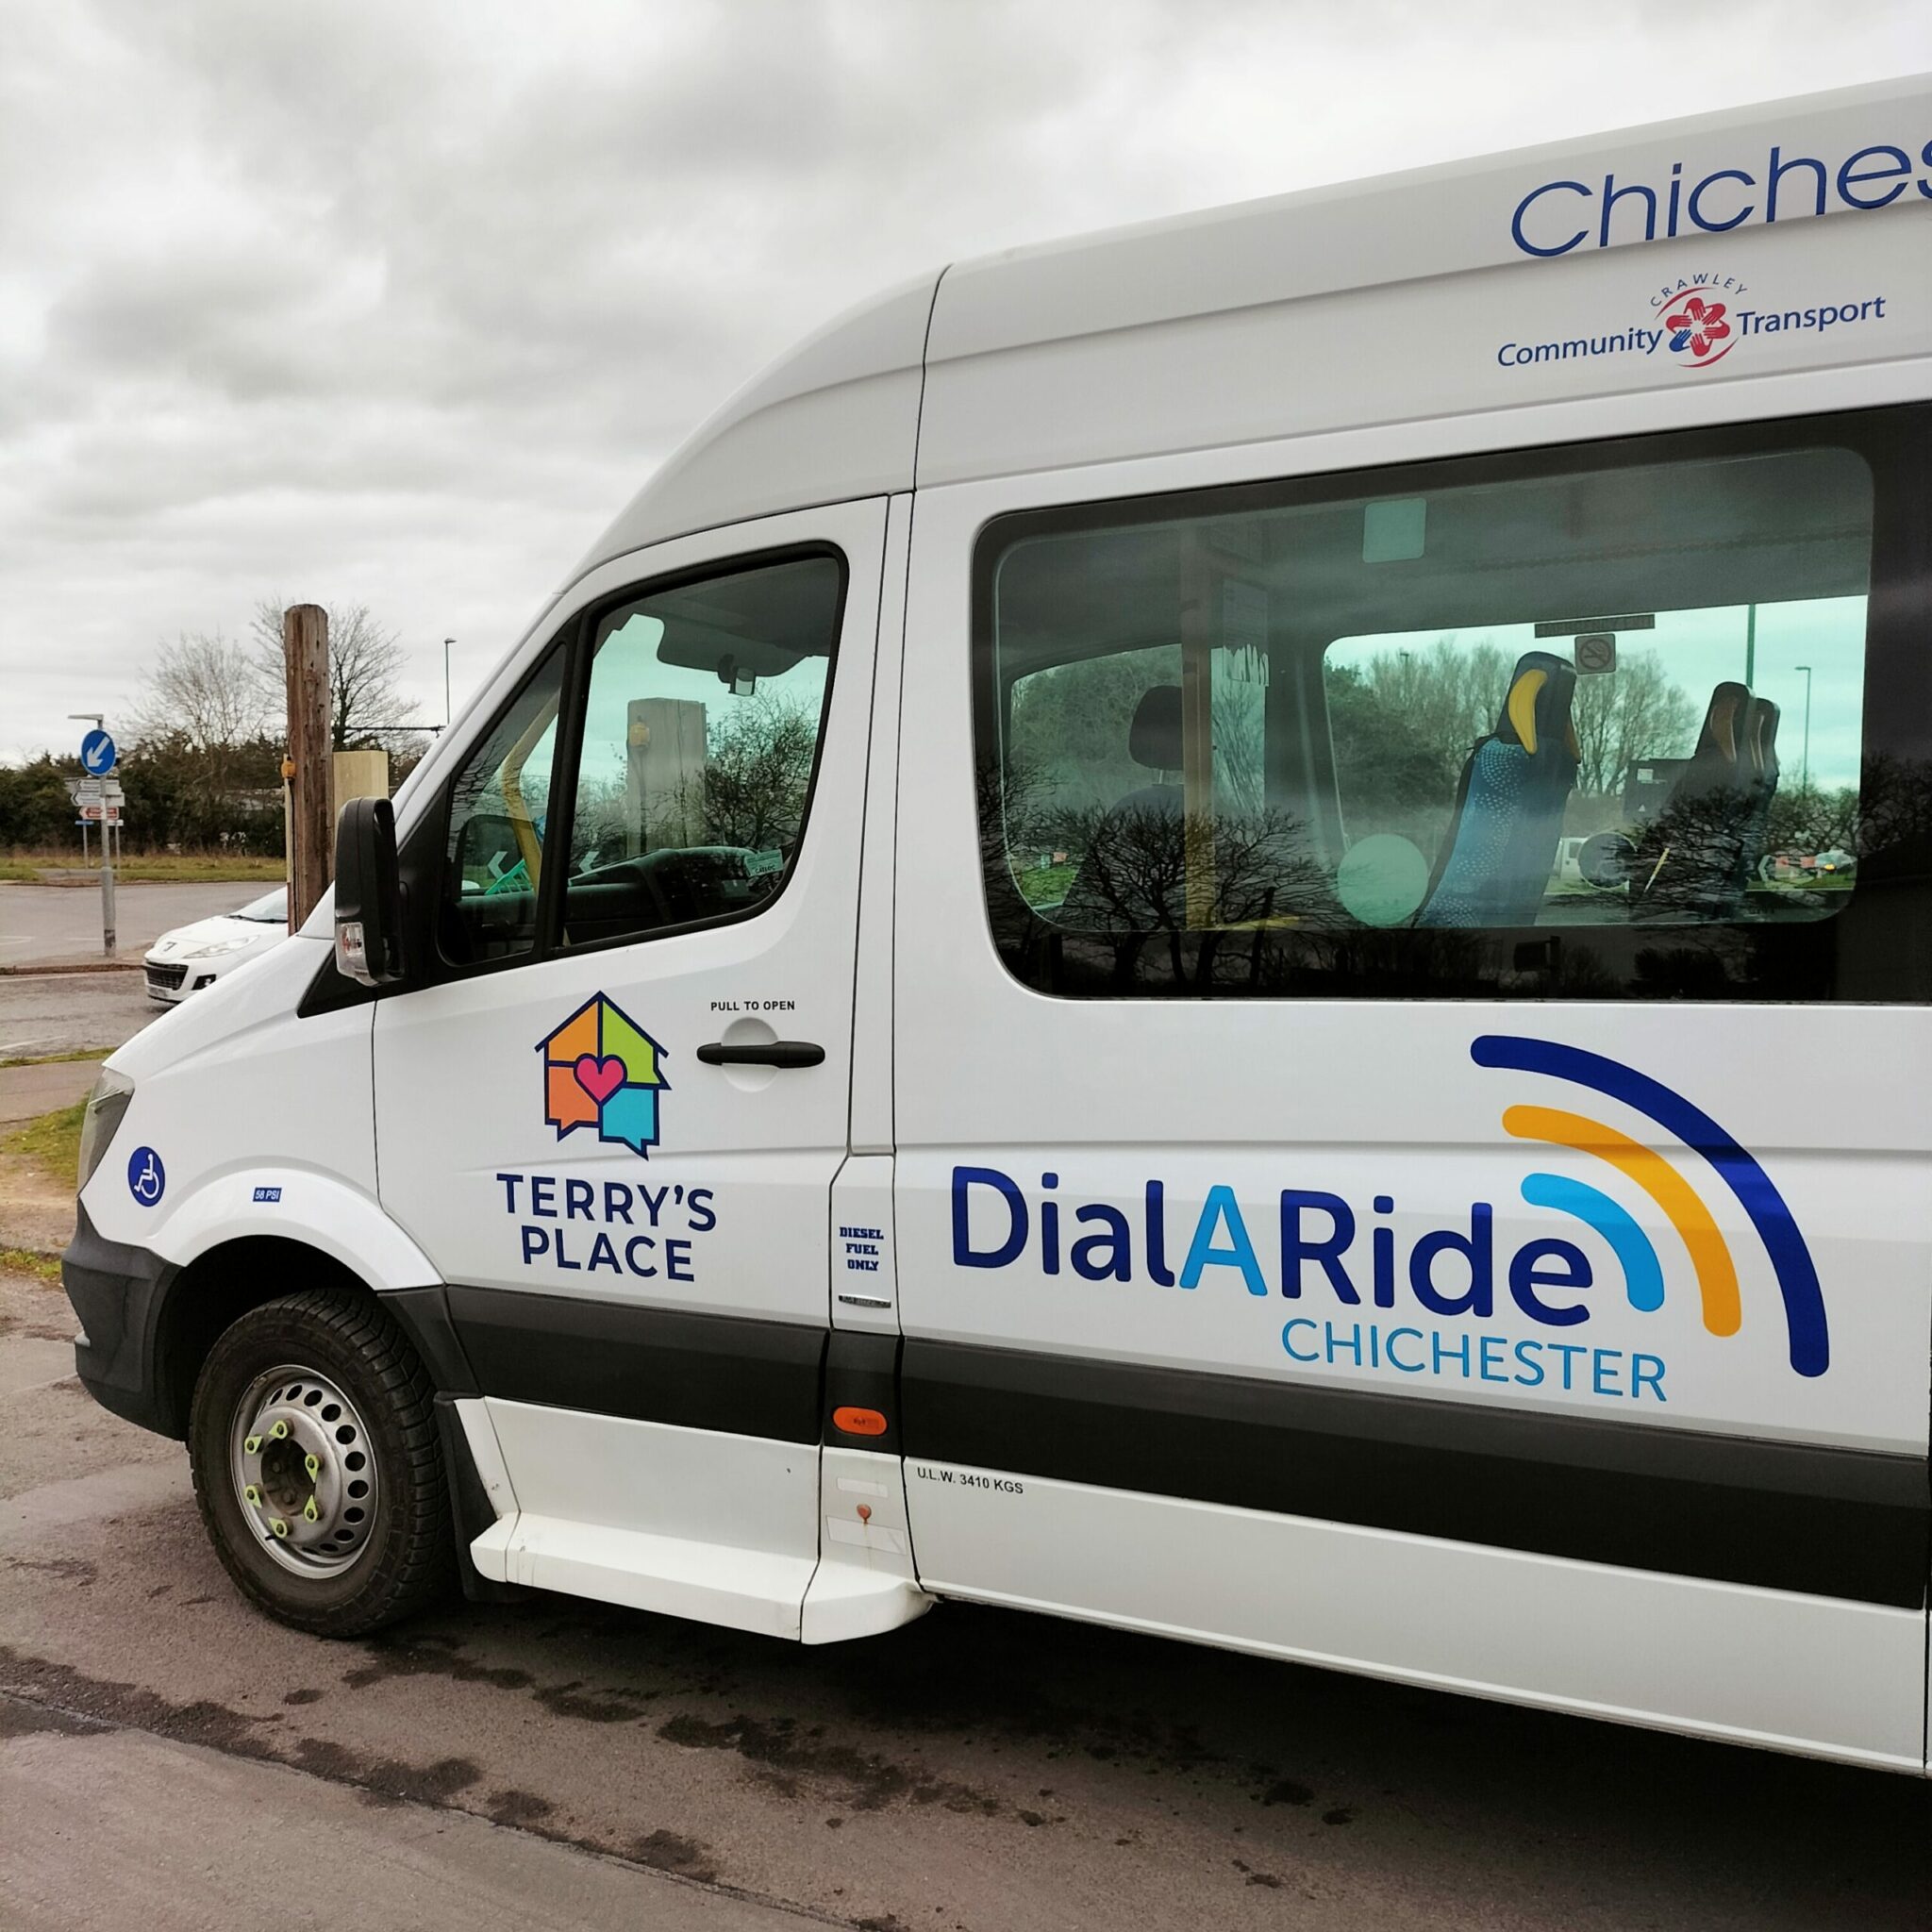 Chichester Dial-a-Ride